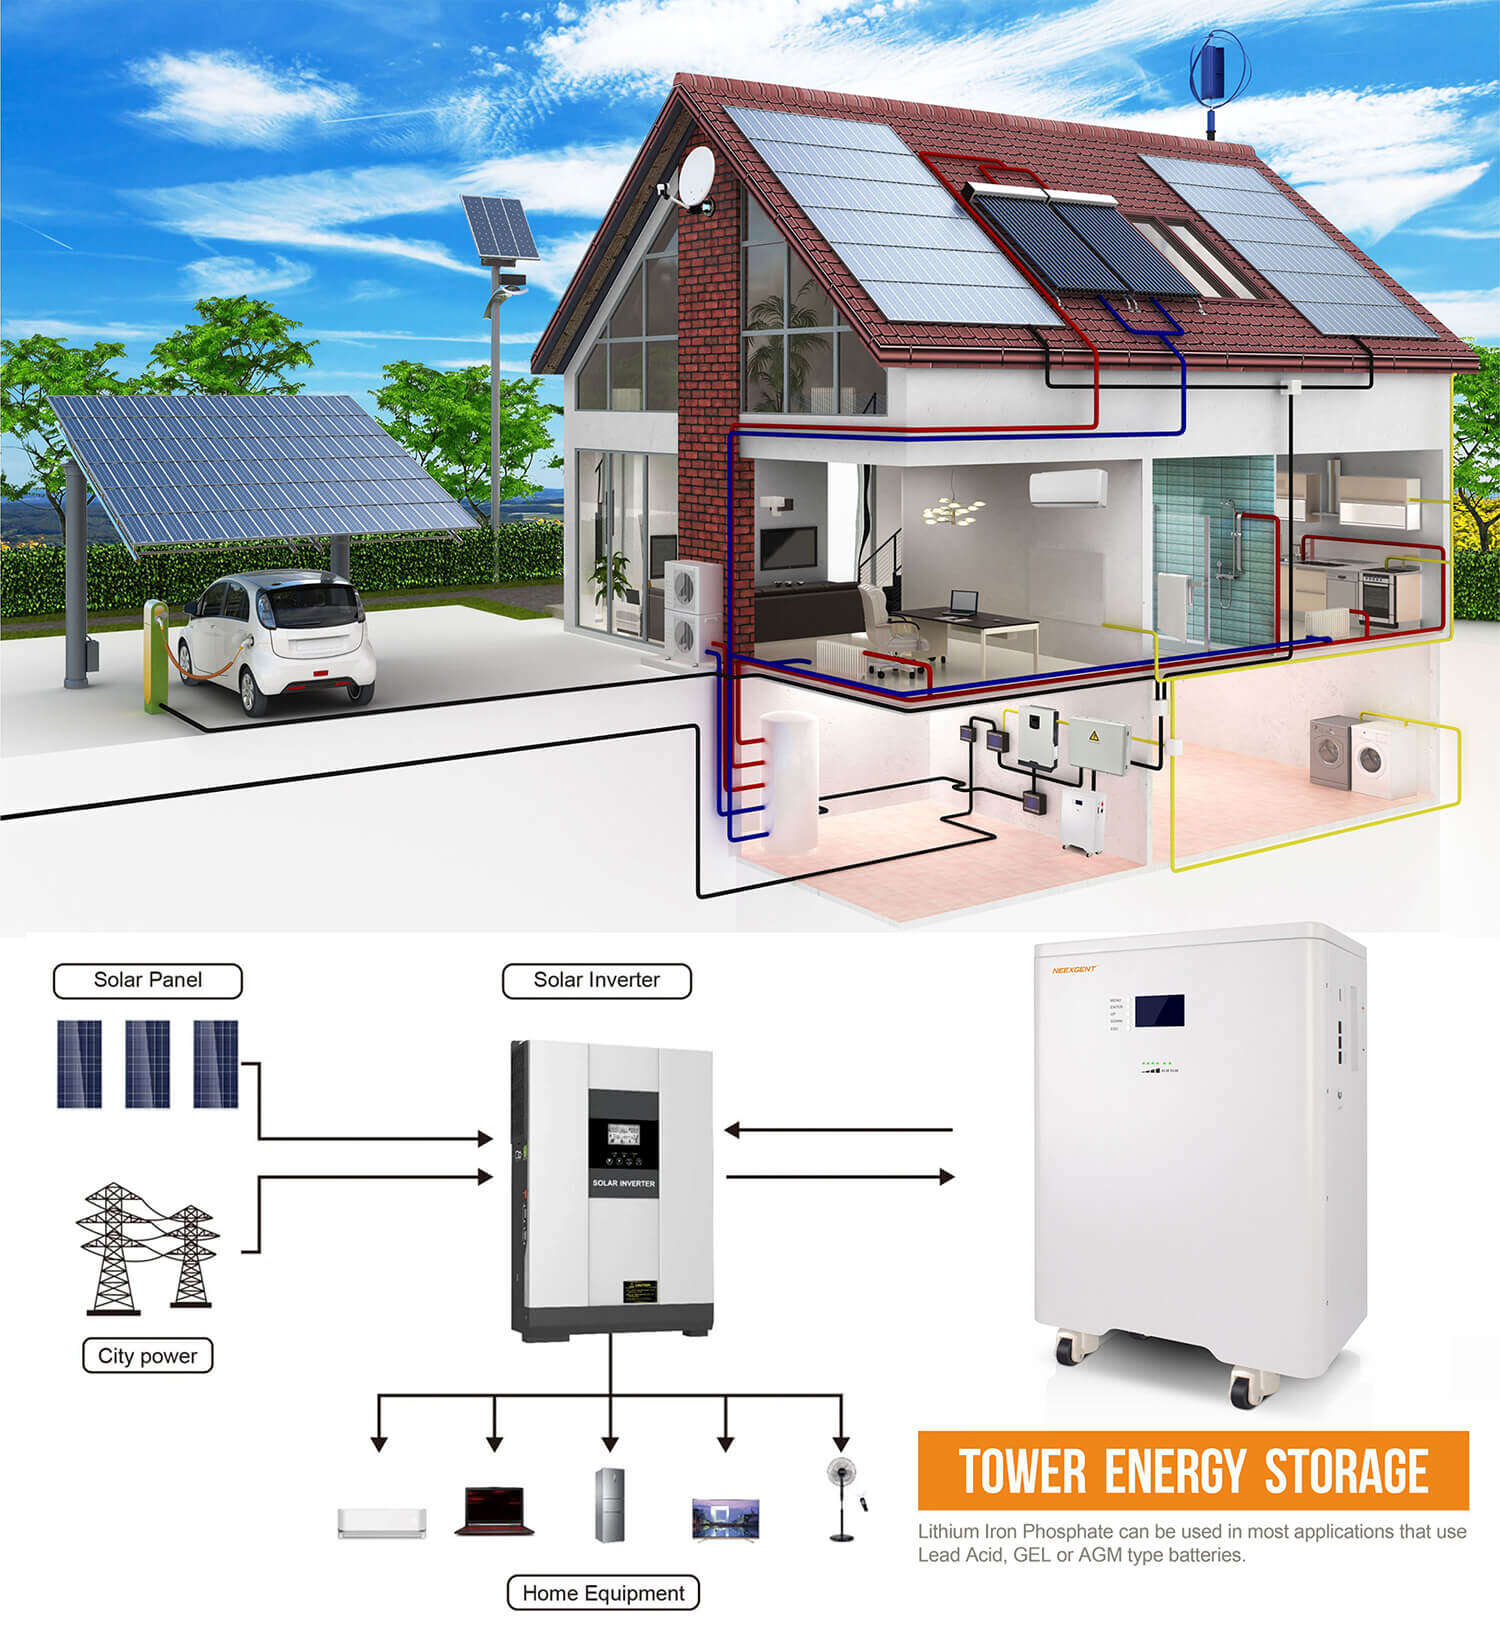 5kw tower battery